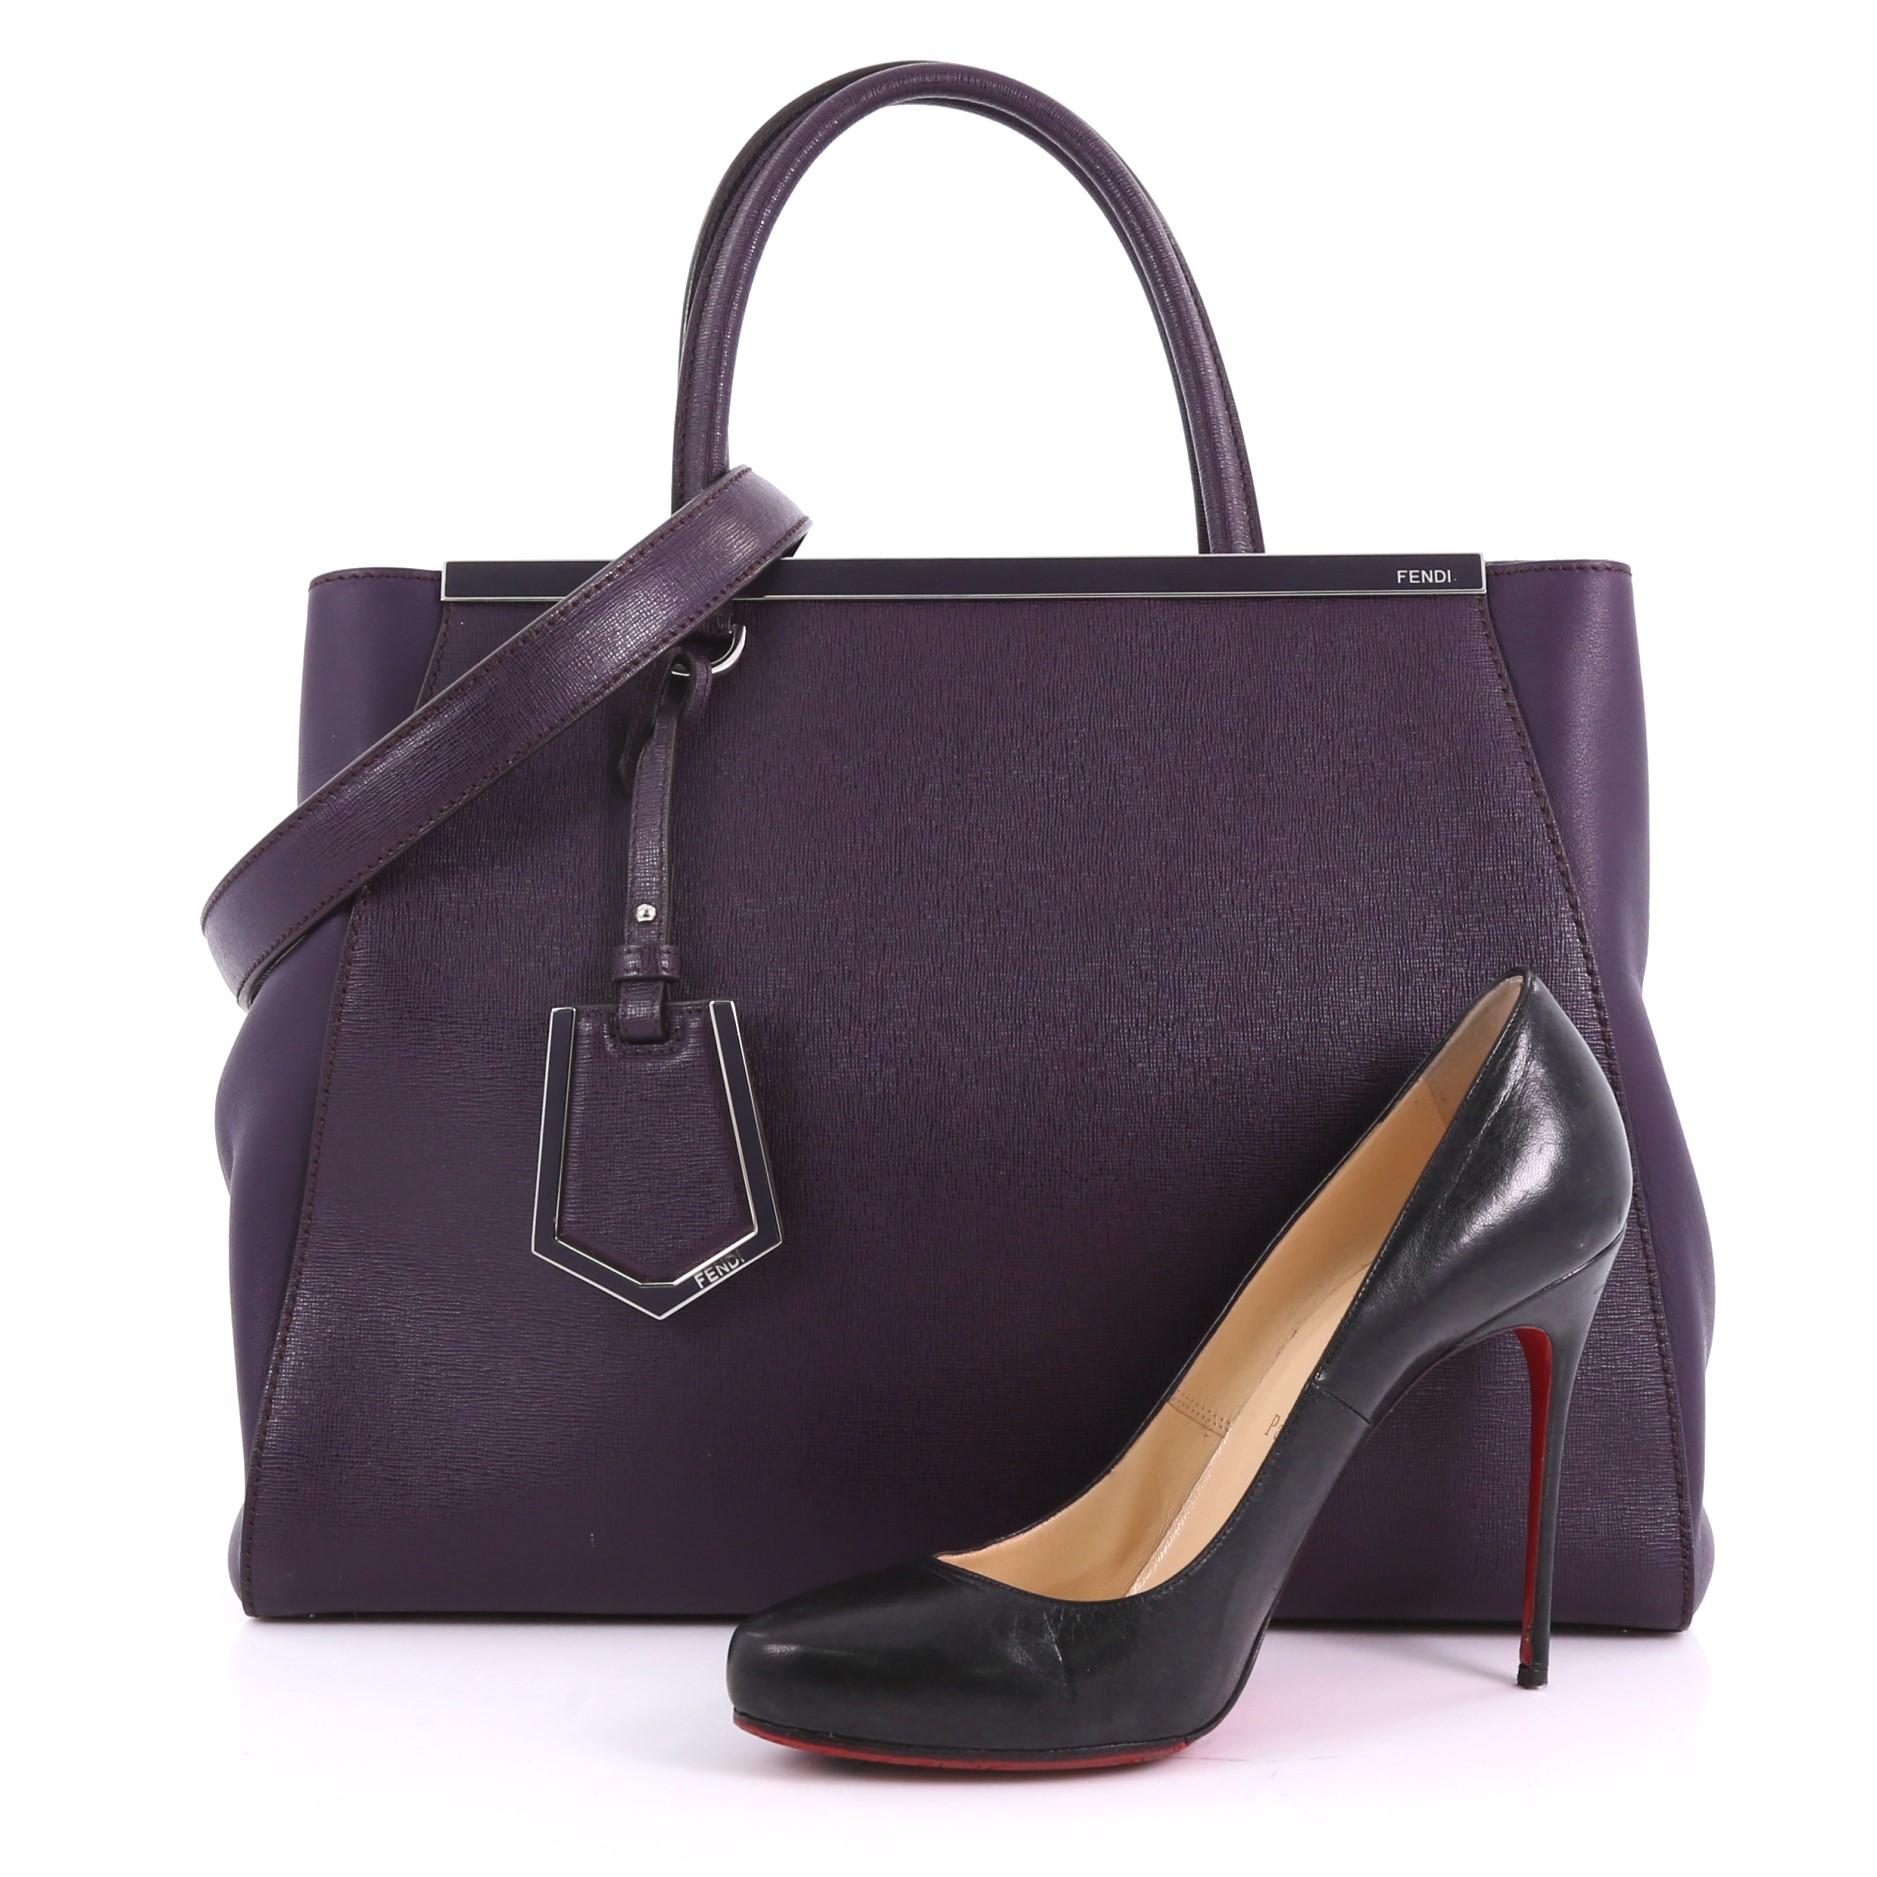 This Fendi 2Jours Handbag Leather Large, crafted in purple leather, features dual rolled leather handles, expanded wings, protective base studs and silver-tone hardware. Its magnetic snap closure opens to a purple fabric interior with zip and slip